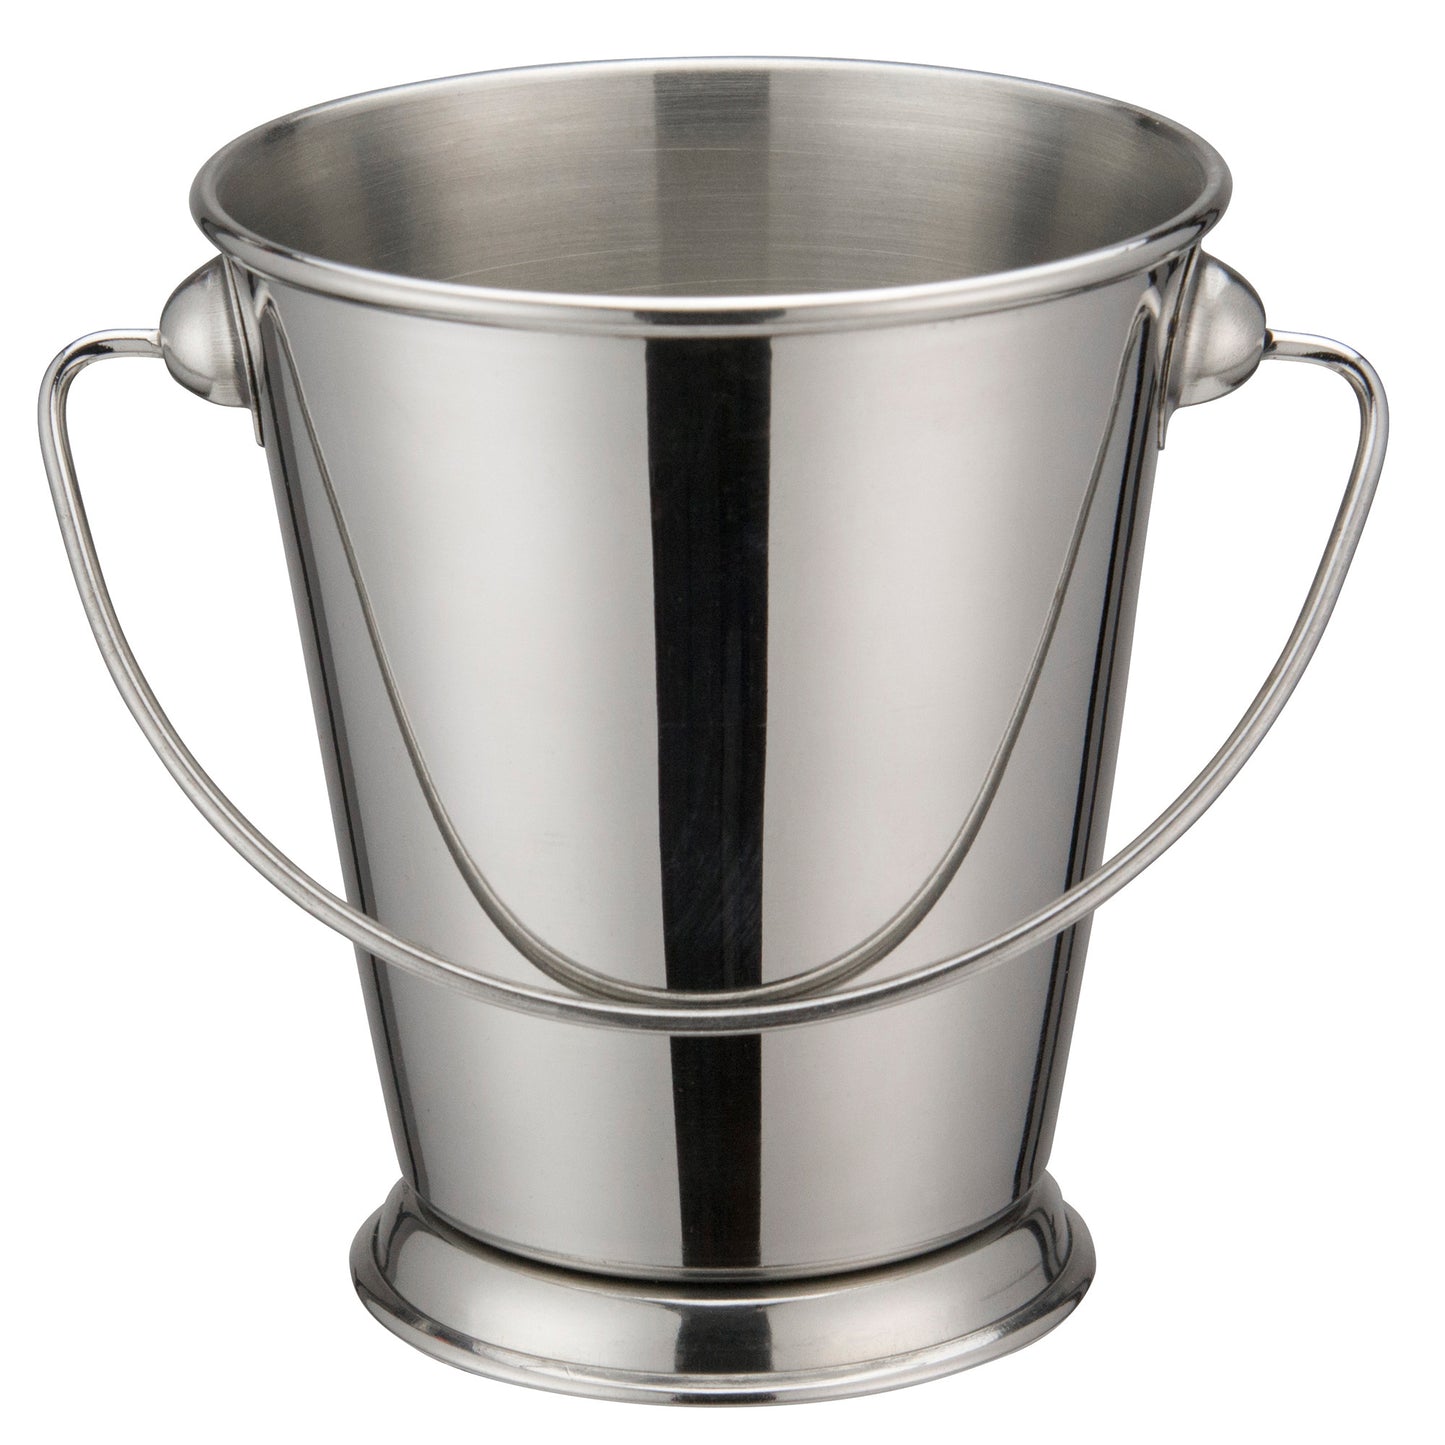 DDSA-107S - Stainless Steel Mini Pail - Smooth, 5"